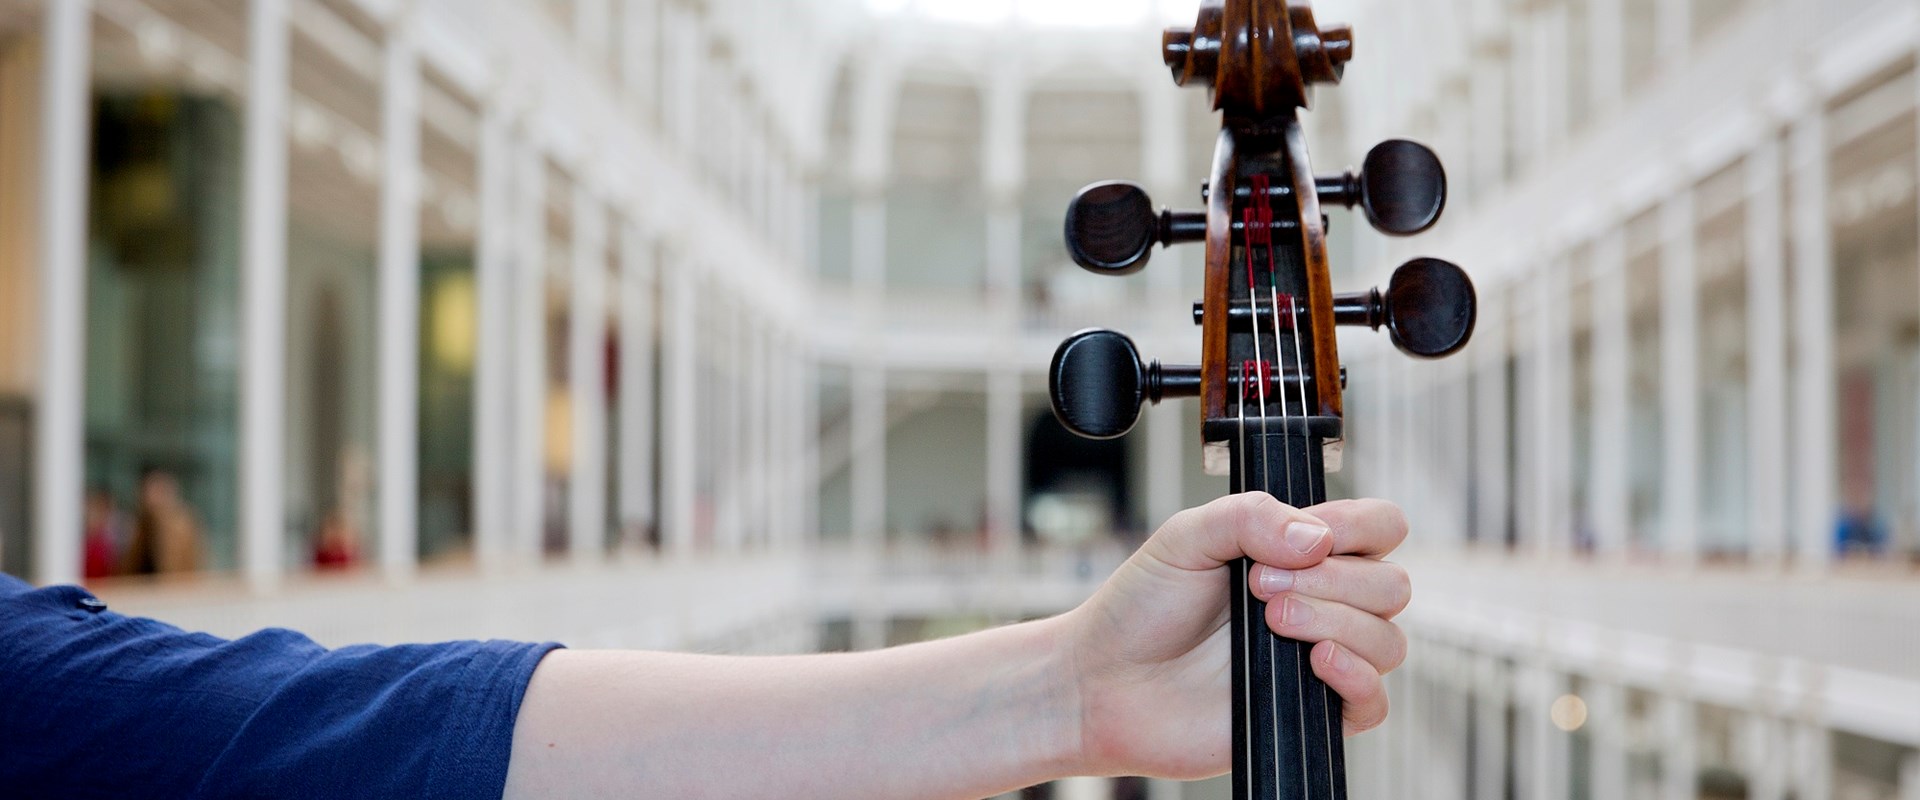 A hand holds the neck of a violin in front of the grand gallery at the National Museum of Scotland.